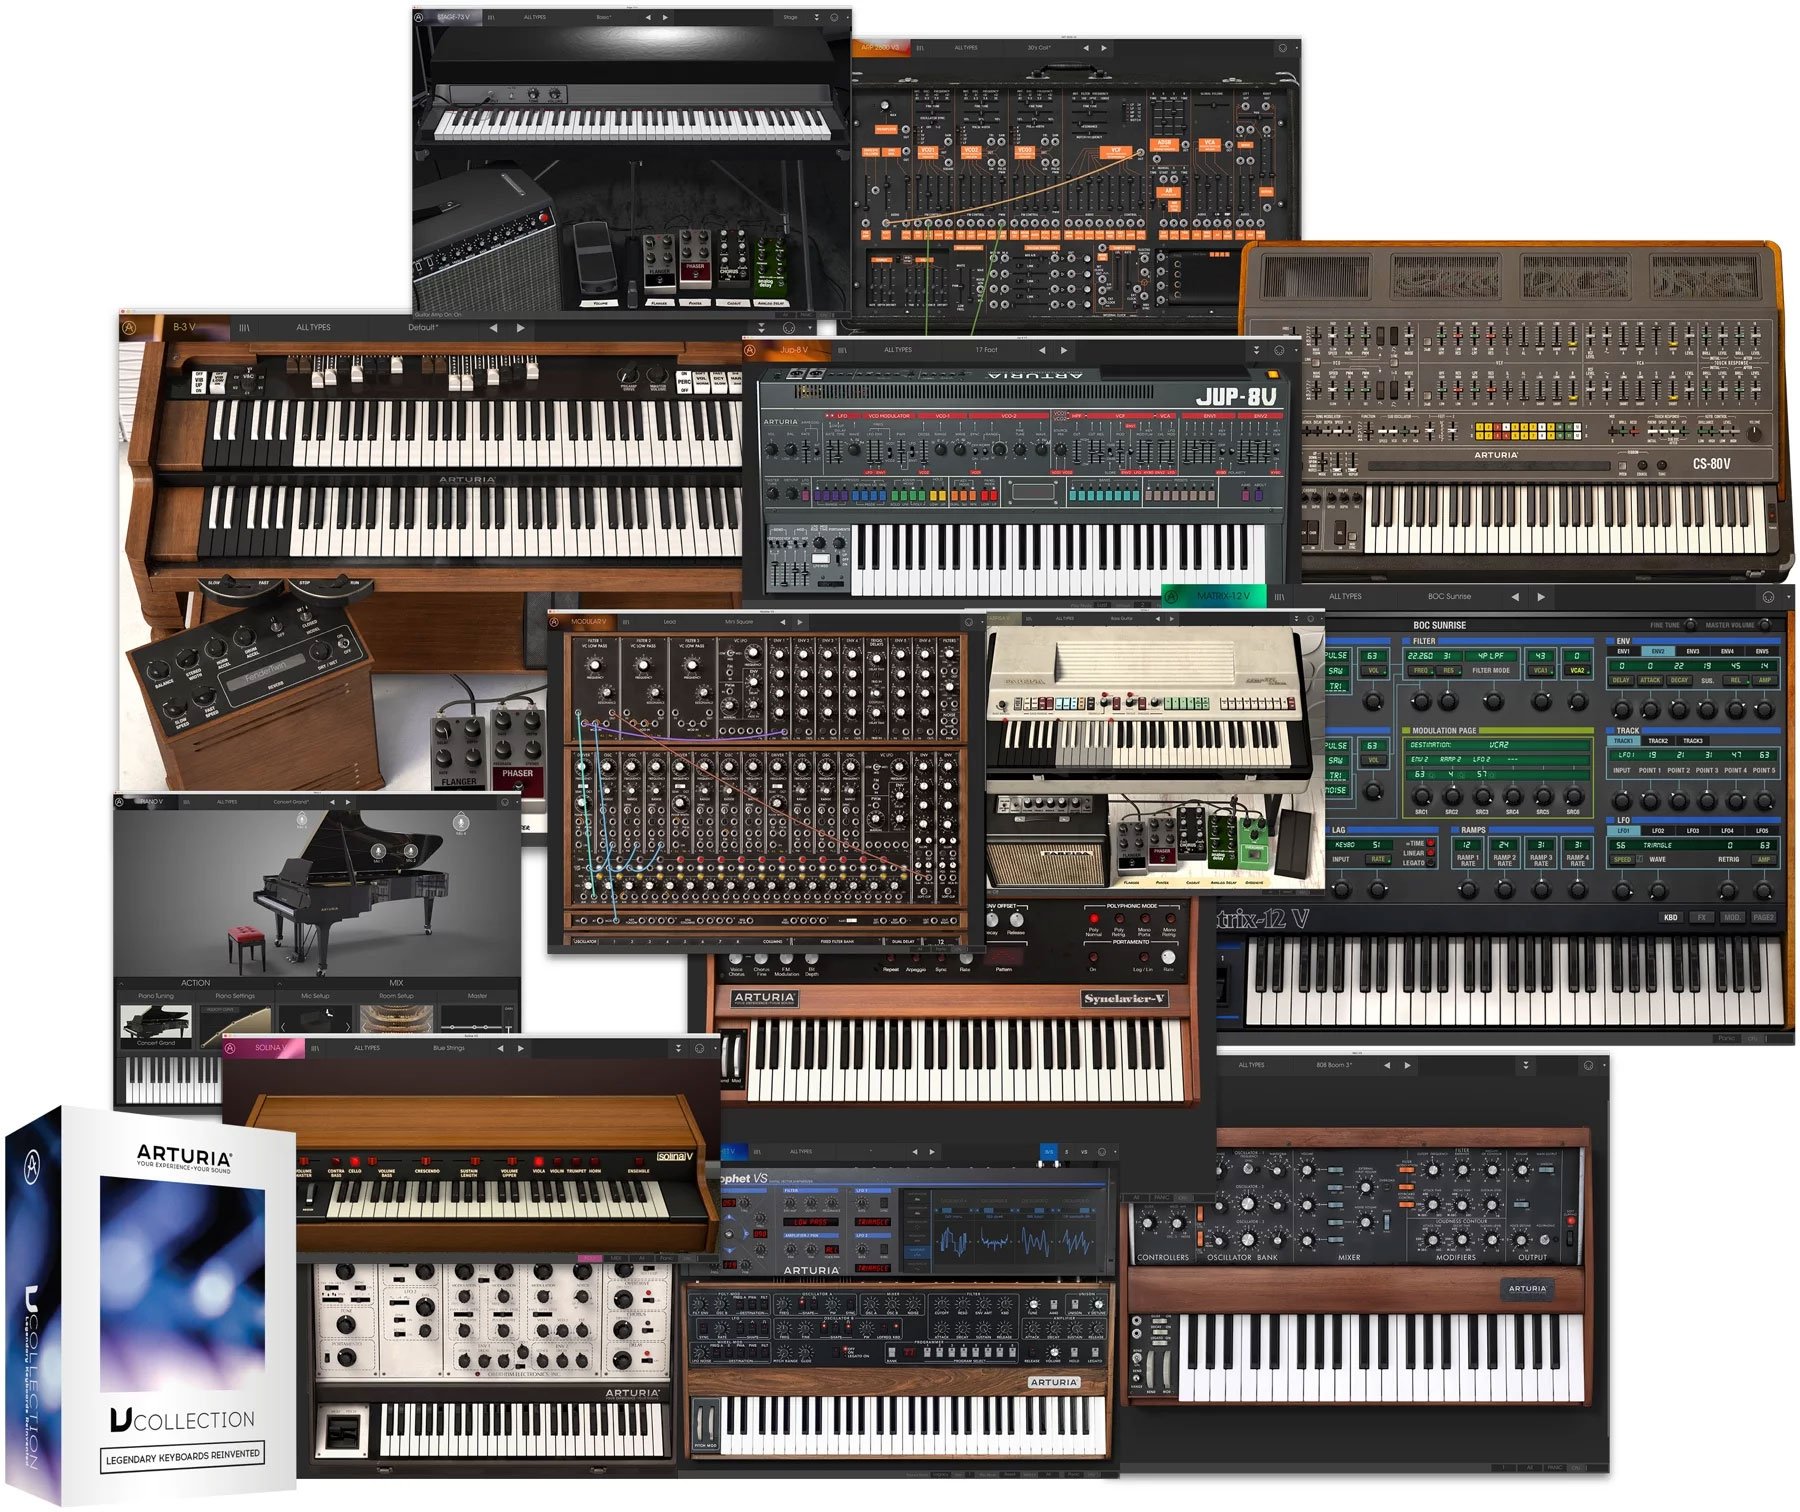 Vst collection. Arturia - Synth v-collection 2022. Arturia v collection 9. Arturia VST V collection 7. Arturia Synth collection.